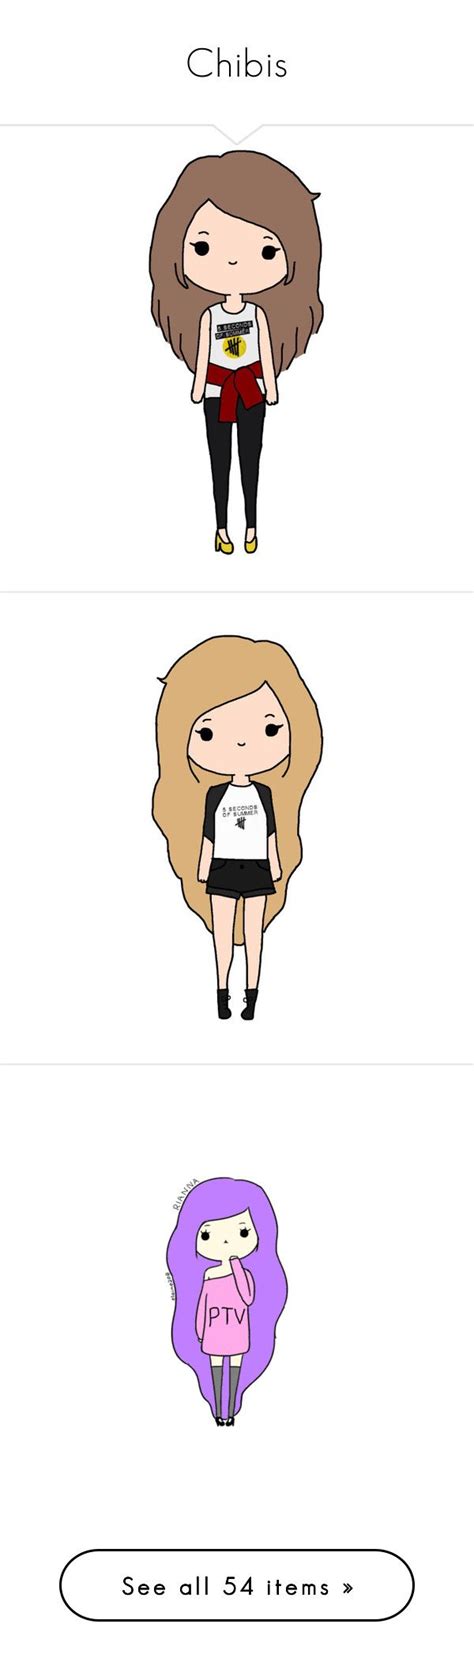 Chibis By Peripierce Liked On Polyvore Featuring Fillers Tumblr